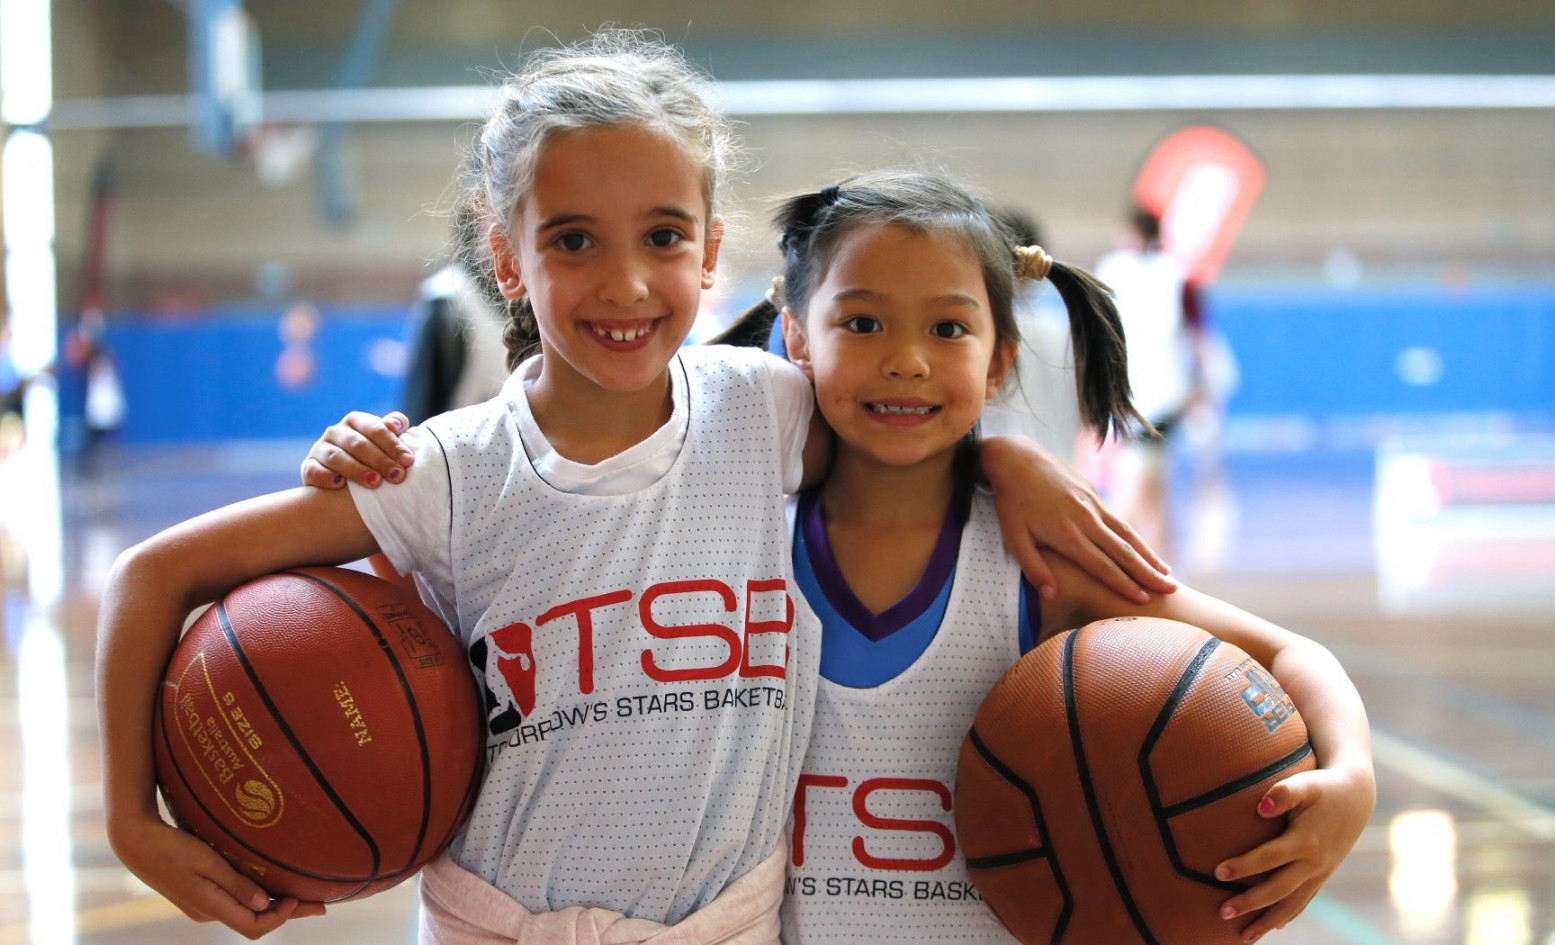 Great basketball games for kids to practice - TSBasketball